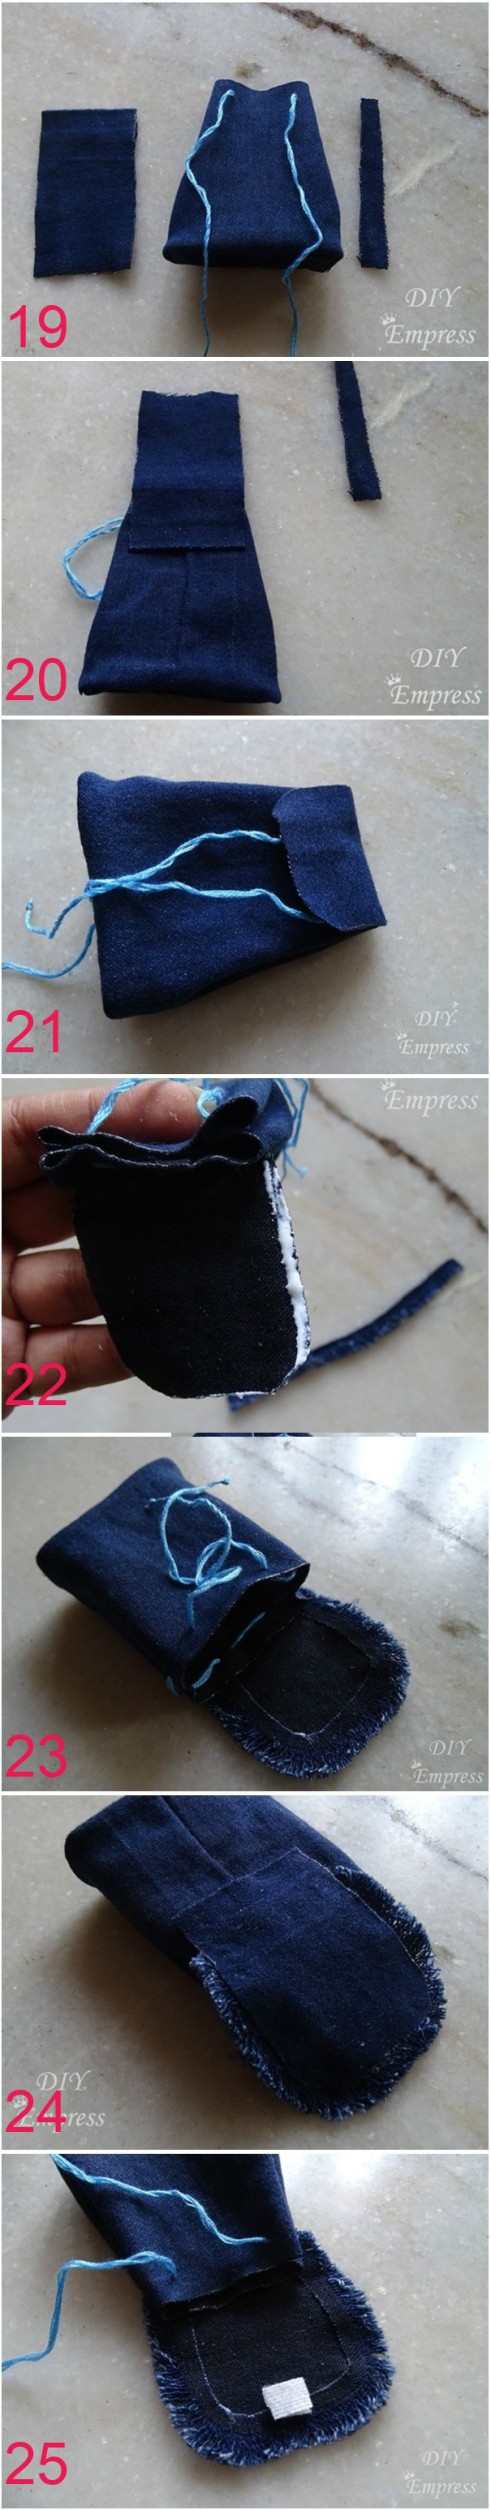 Mini backpack keychain or coin purse tutorial – DIY EMPRESS